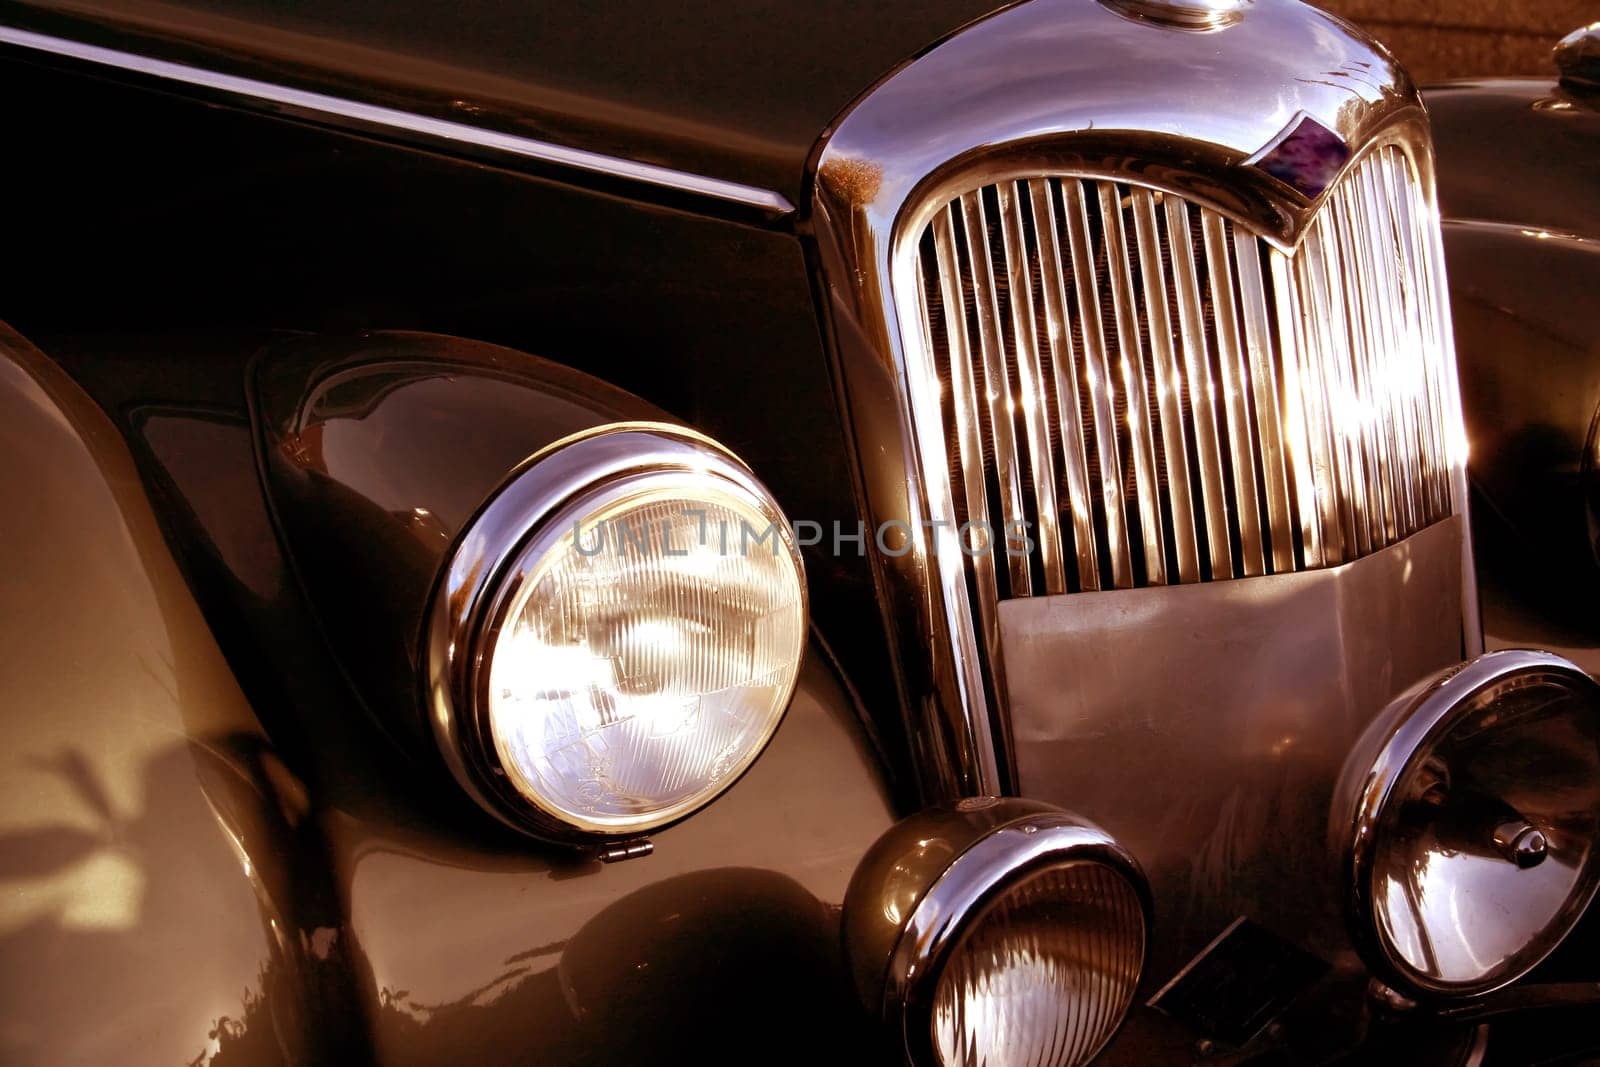 The front grill and headlight of the old beautiful car on the background copy space, card background, multimedia content creation